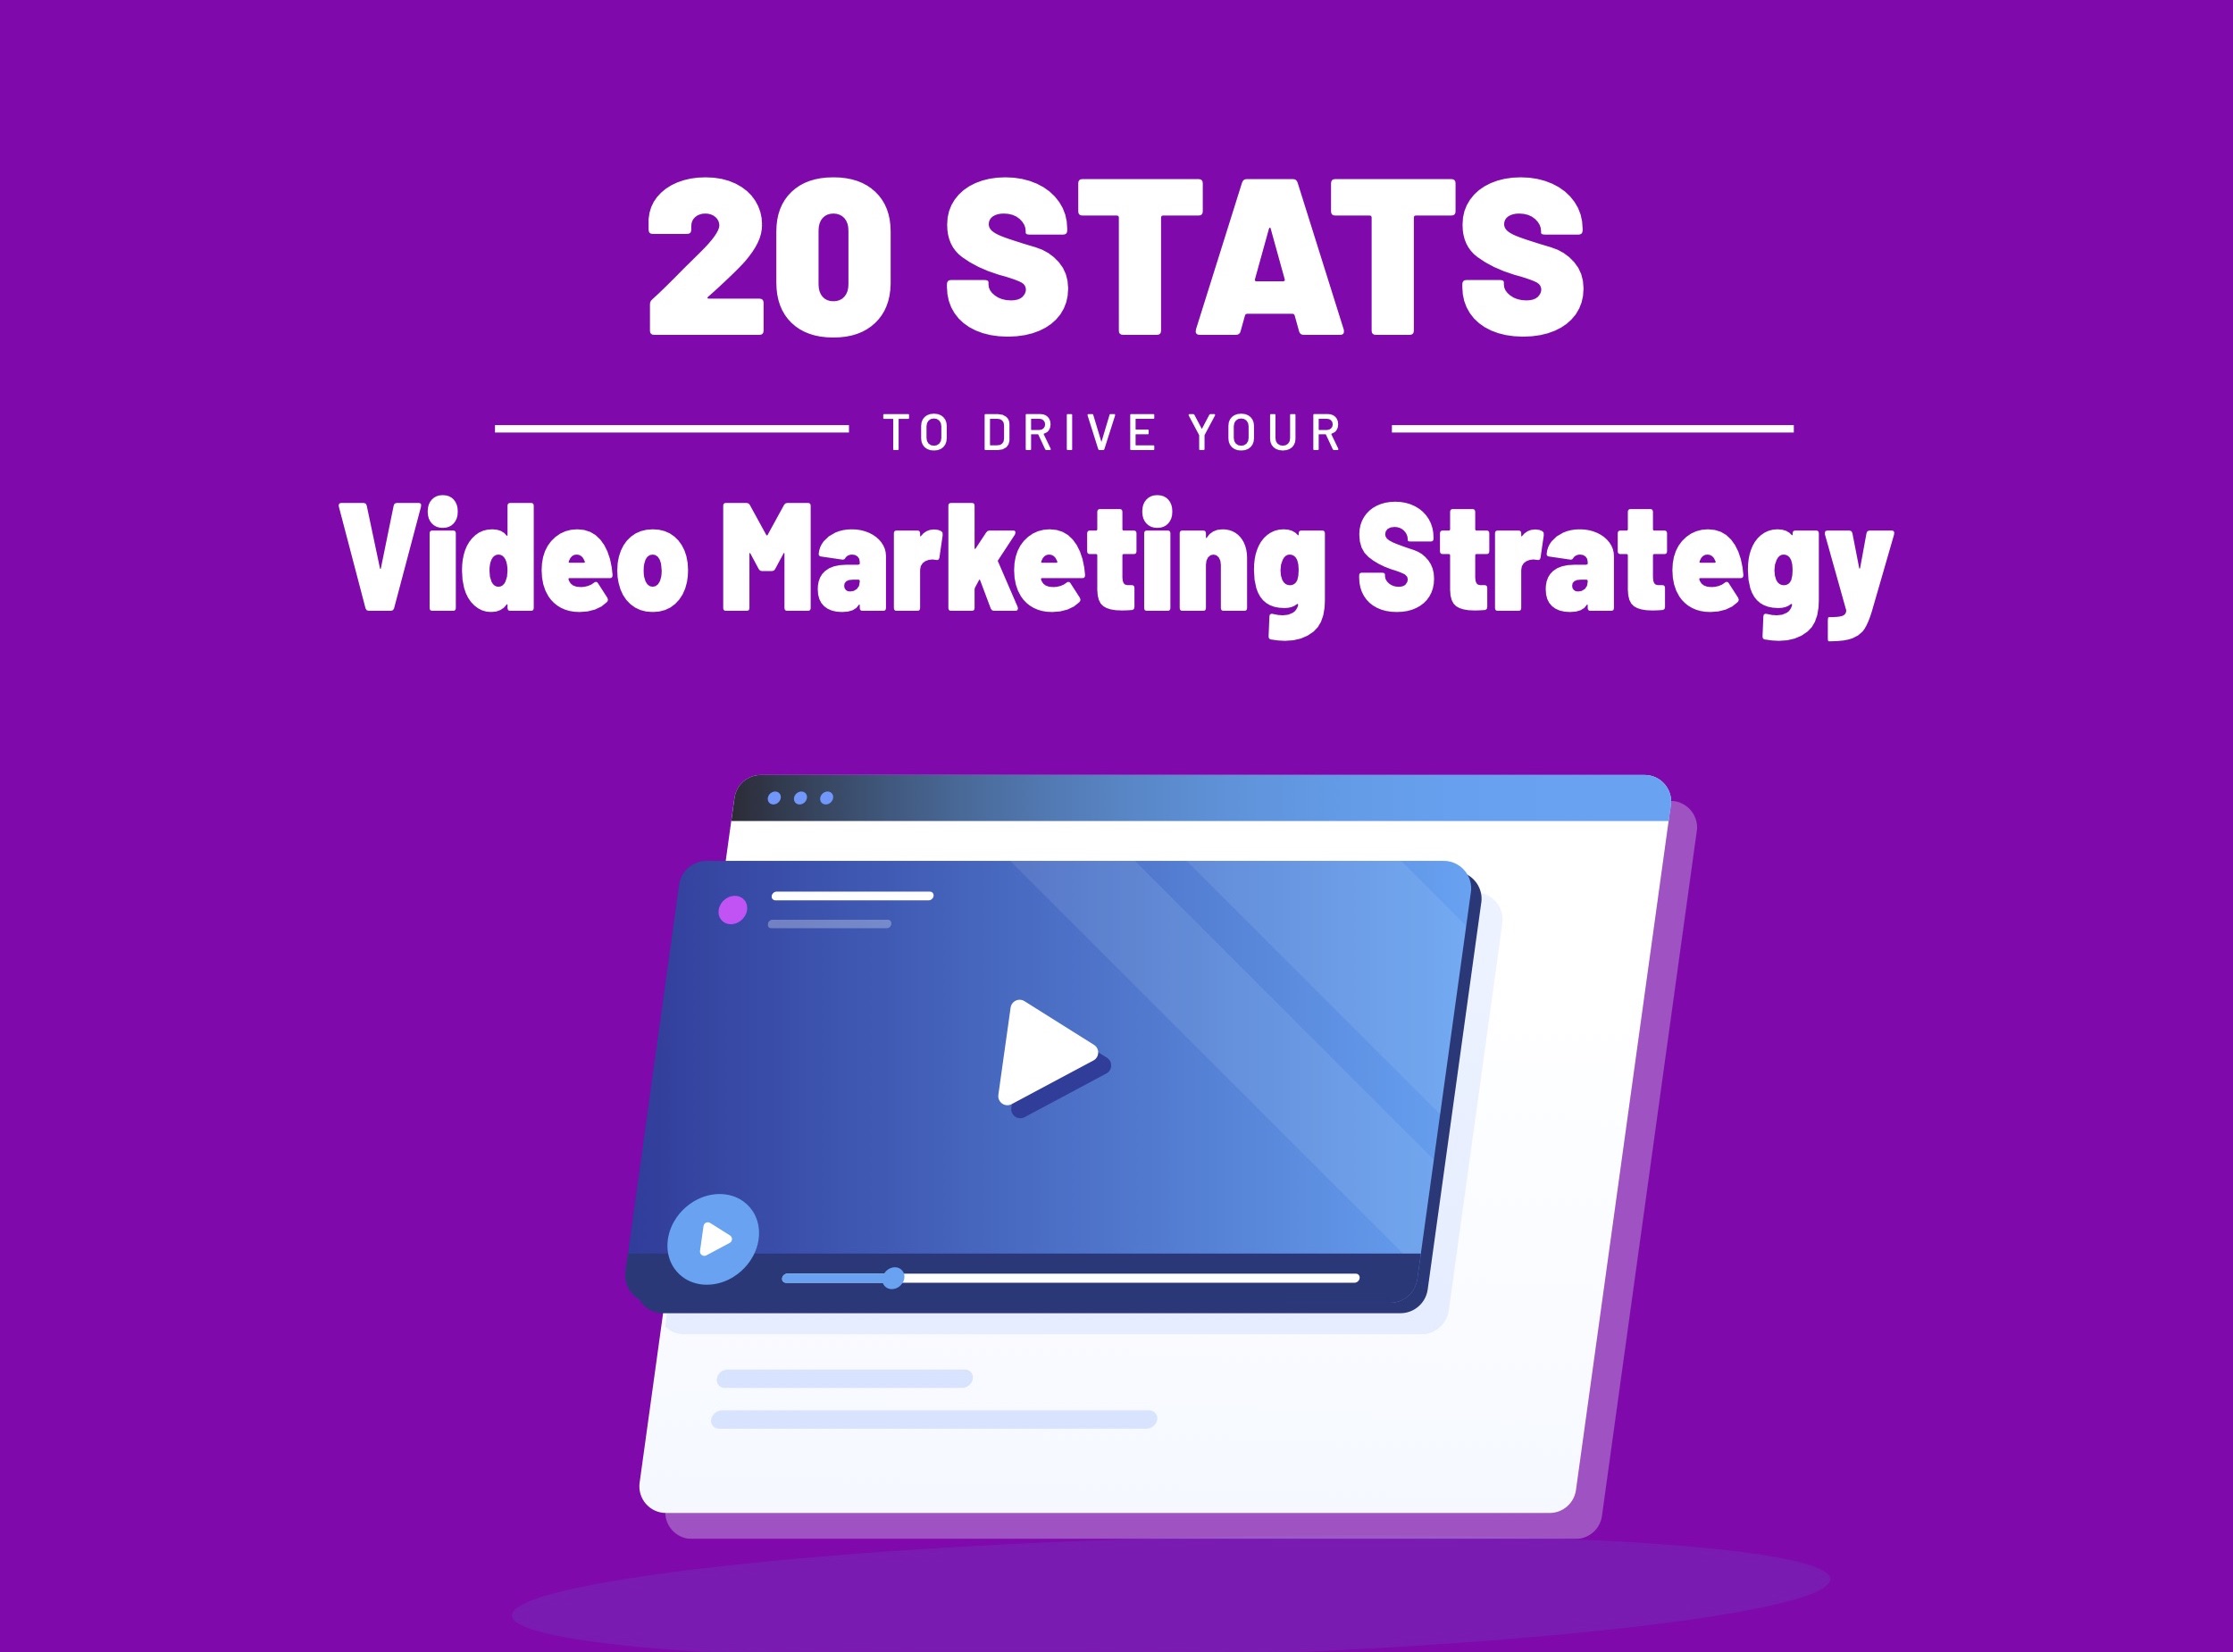 Channel Bakers header image of 20 Stats to Drive Your Video Marketing Strategy in 2020.